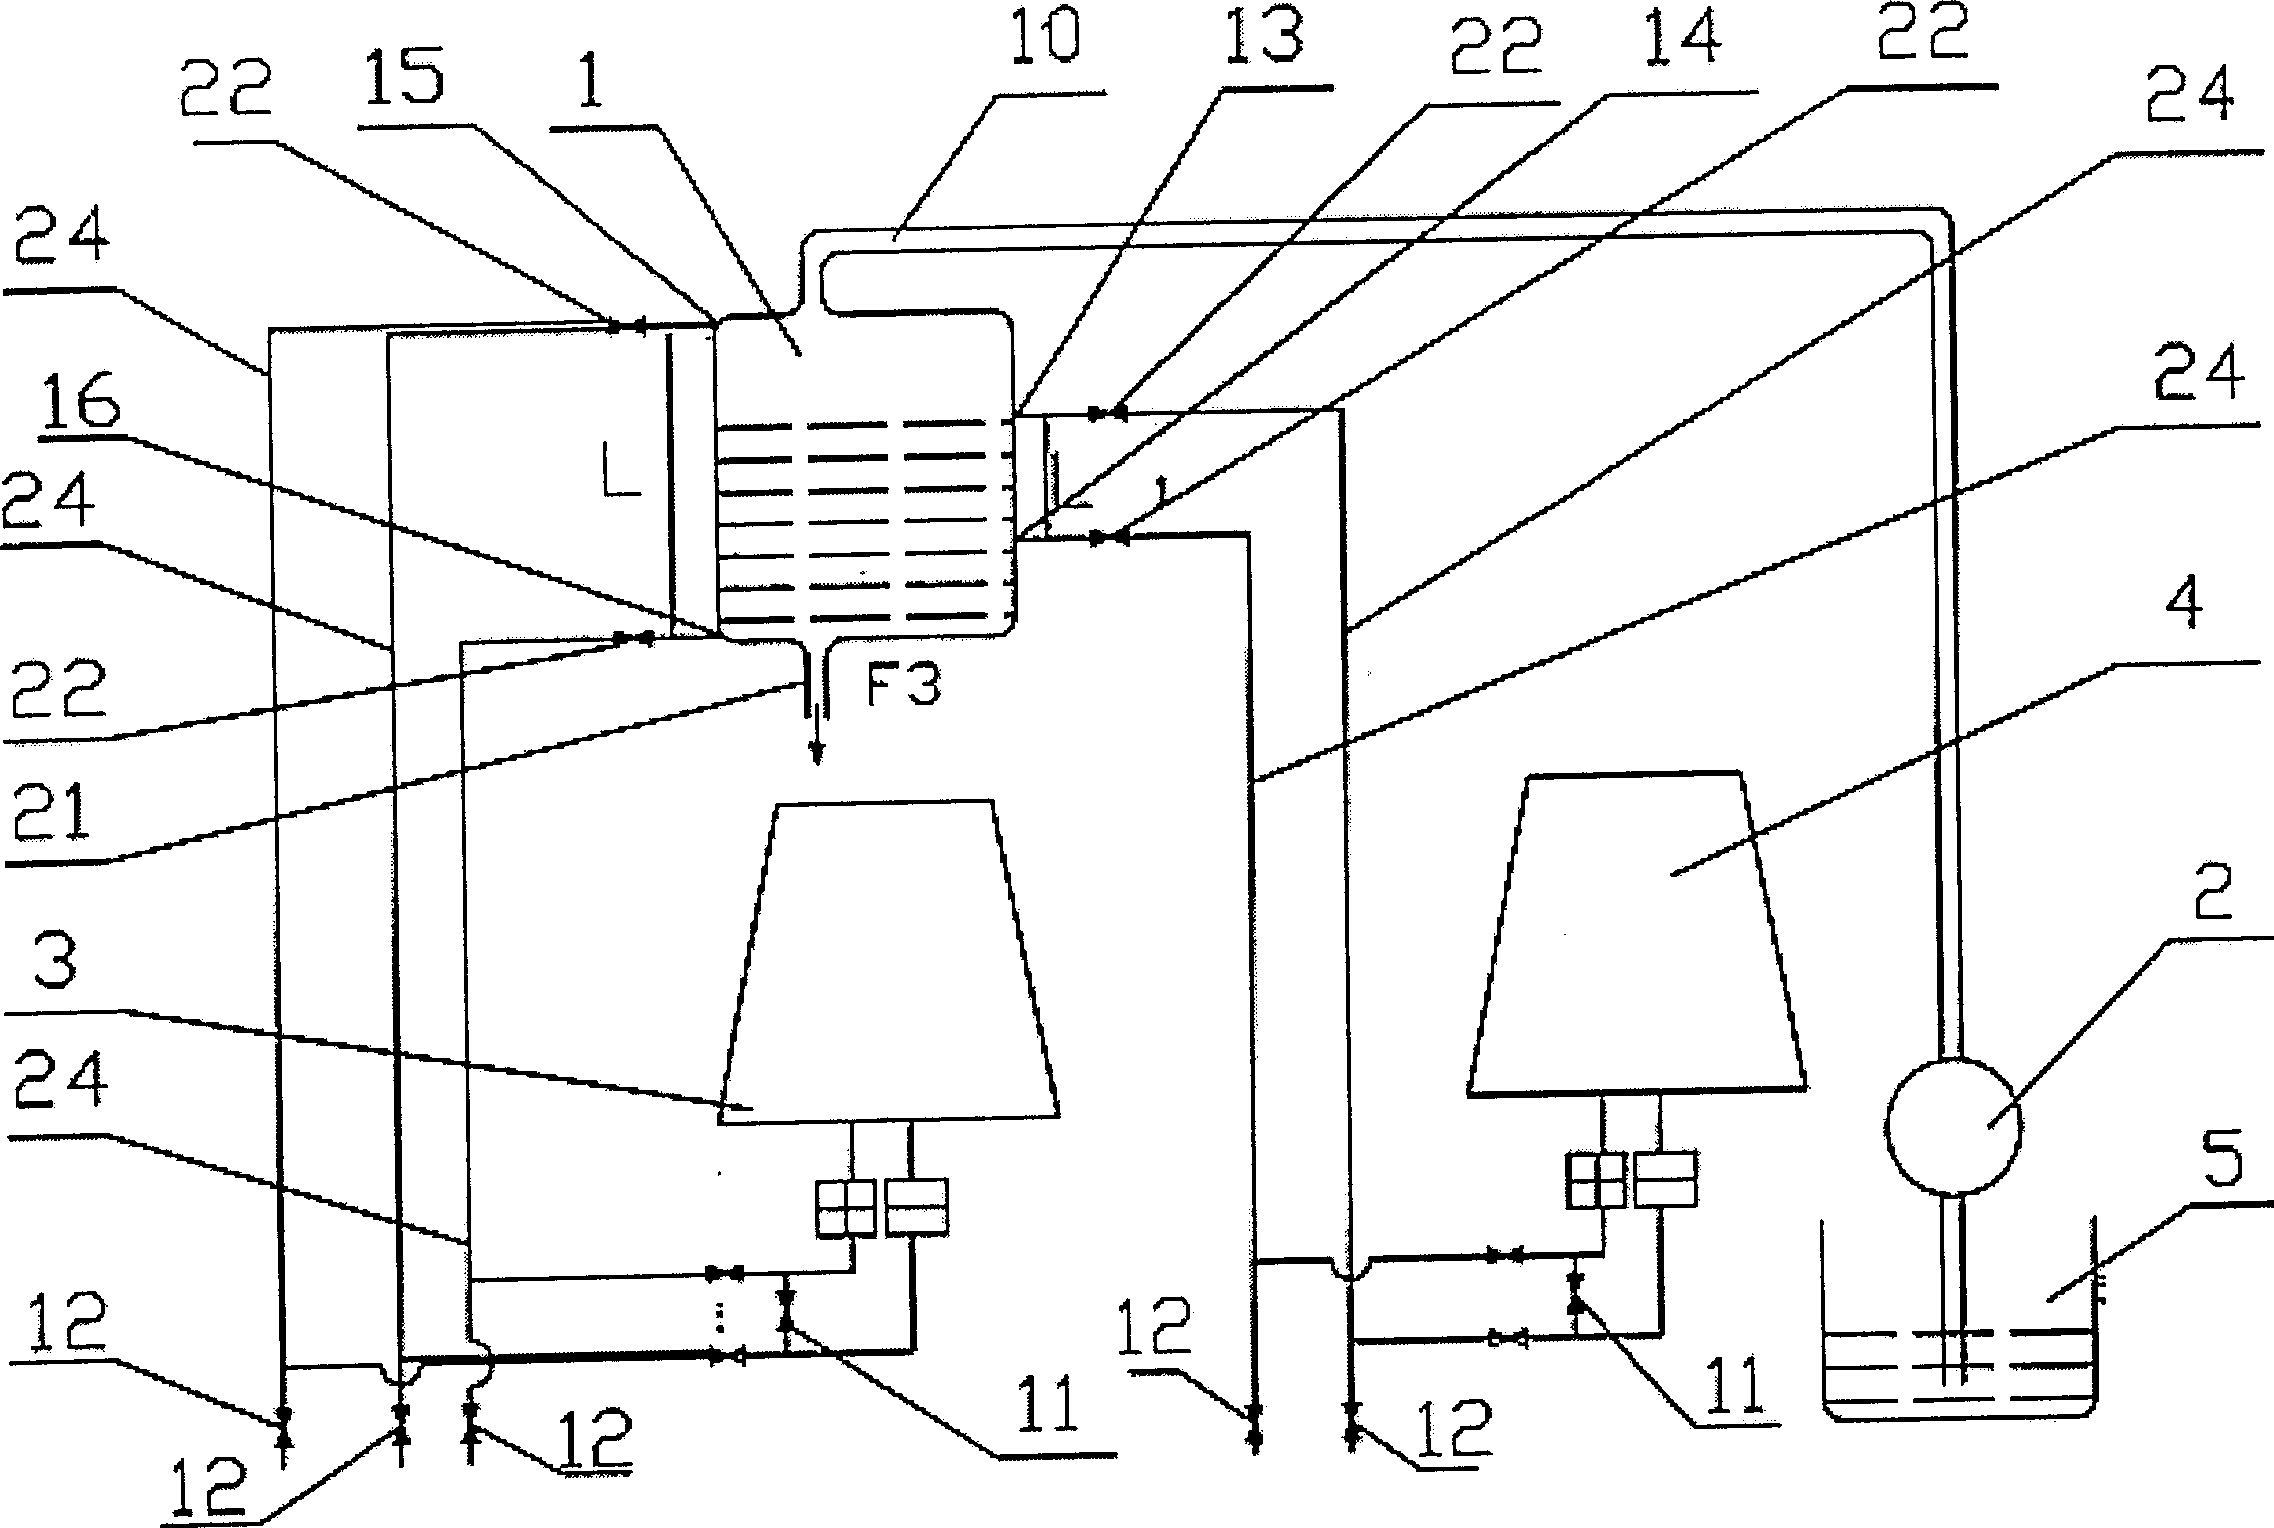 Direct liquid level controlling system with single-loop pump